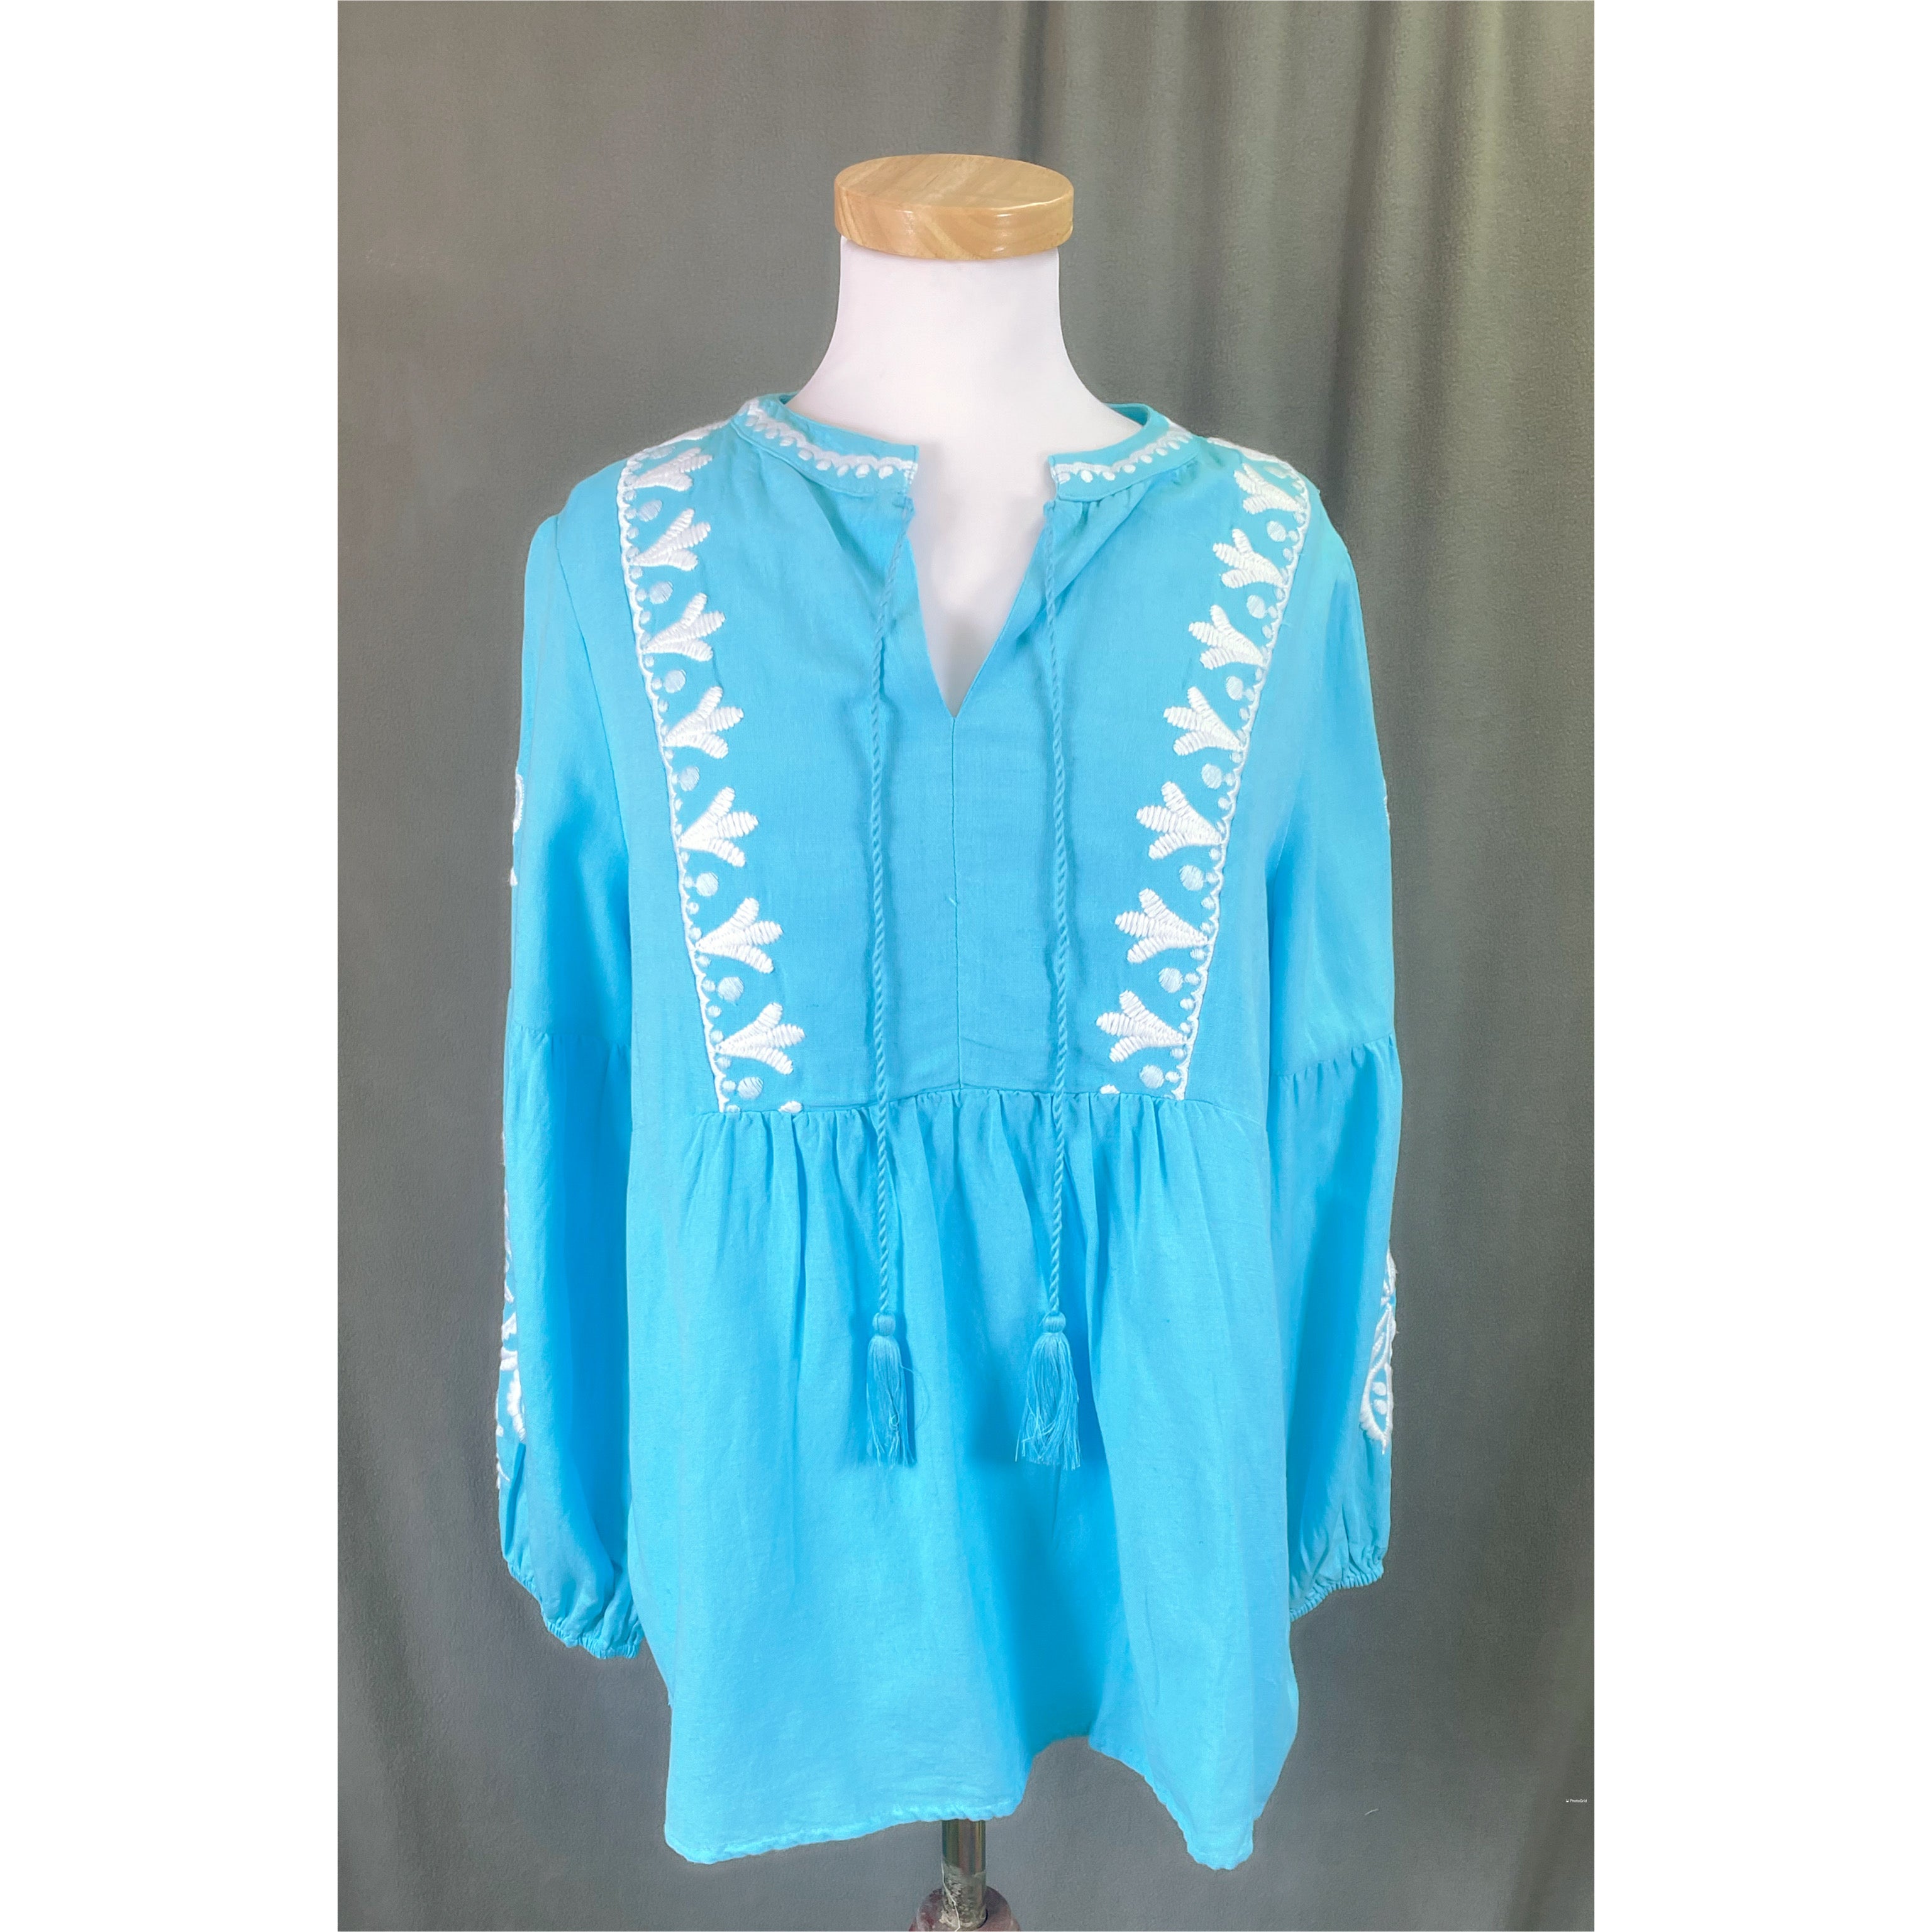 Soft Surroundings turquoise embroidered blouse, size M, NEW WITHOUT TAGS!